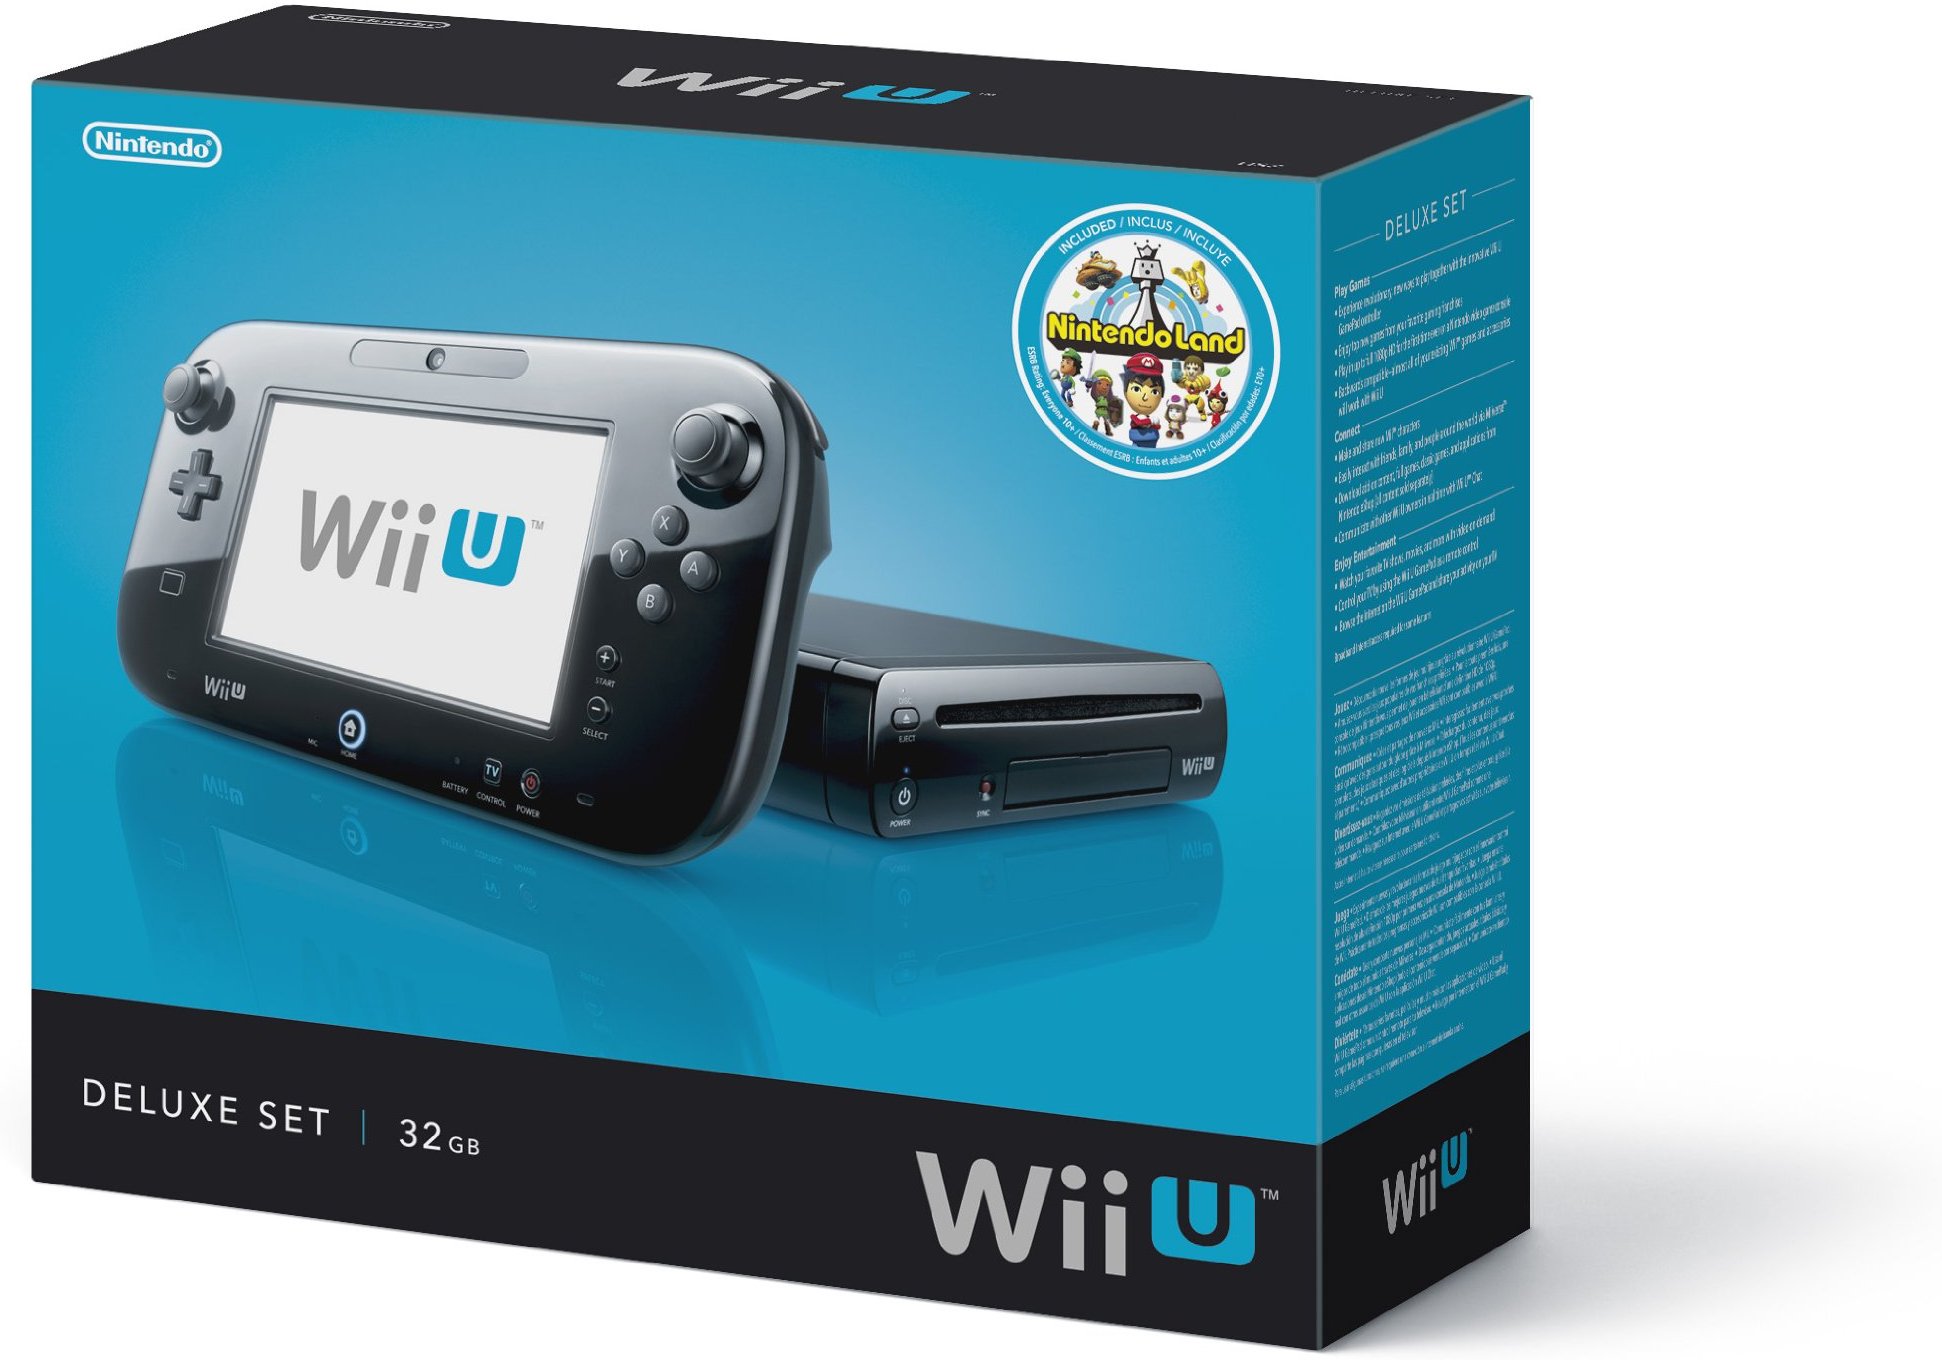 Rpg Site Amazon Warehouse Has Used Wii U Systems For Only 121 T Co Azbeze4jr1